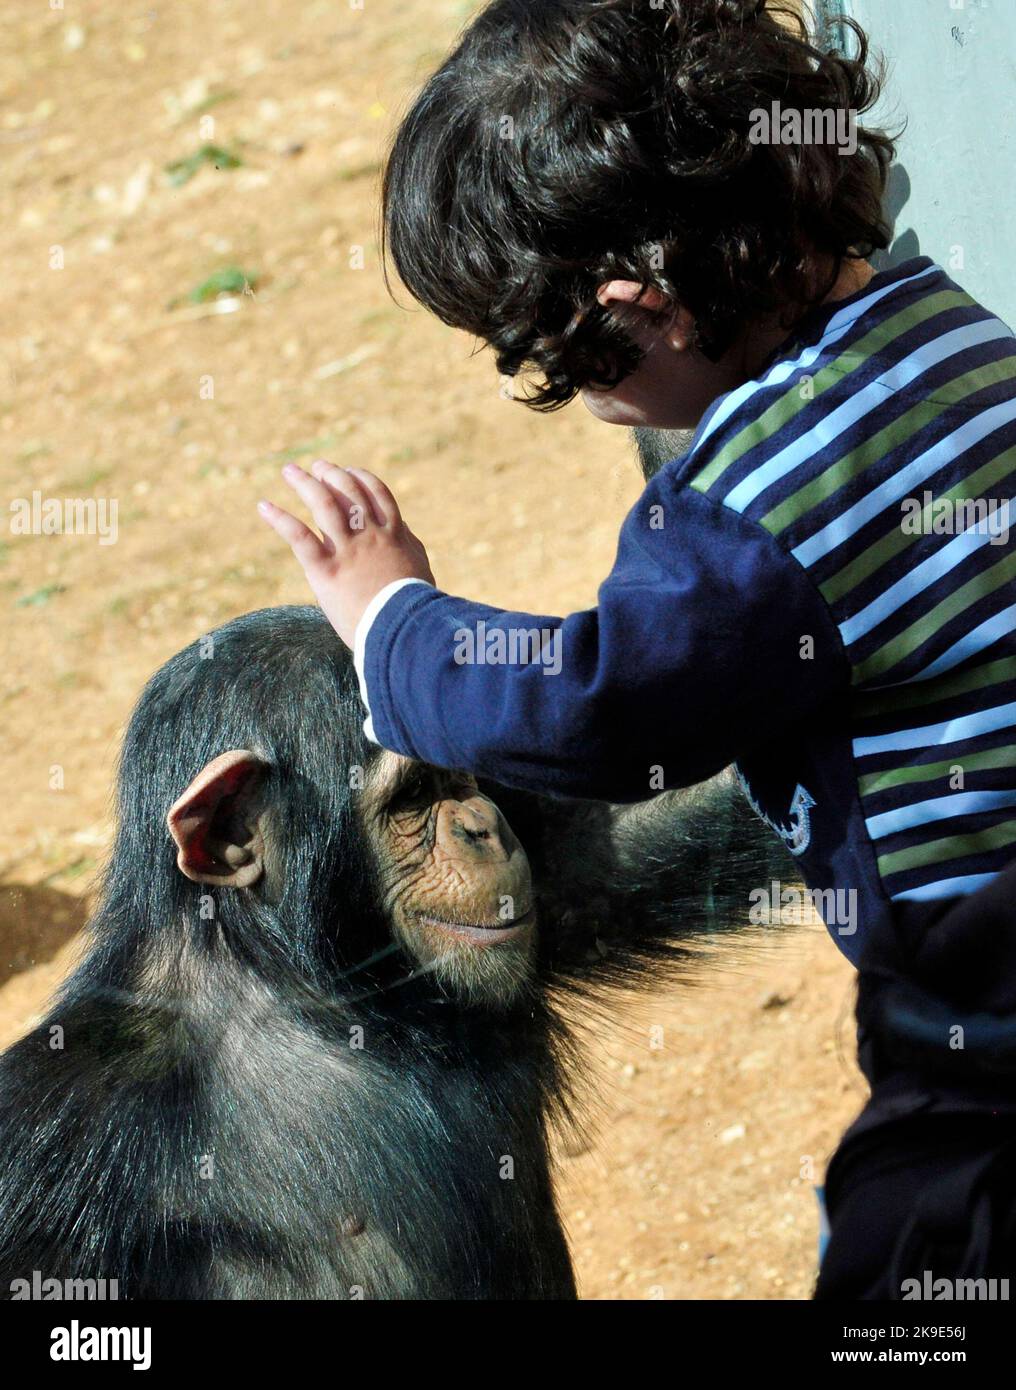 A toddler and a Chimpanzee gazing and interacting with each other. Stock Photo